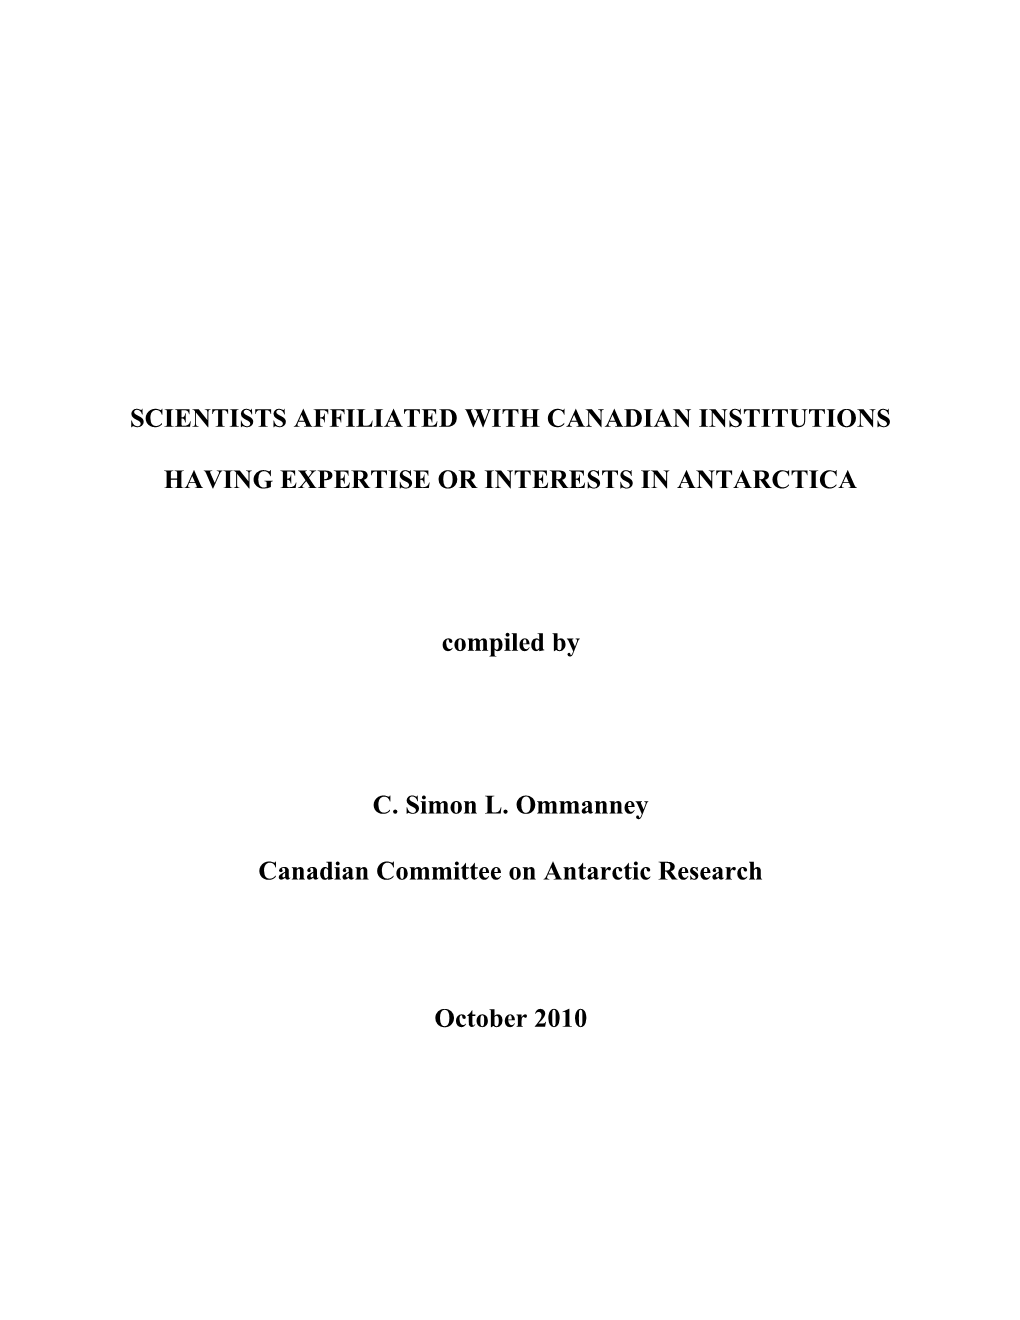 Scientists Affiliated with Canadian Institutions Having Expertise Or Interests in Antarctica